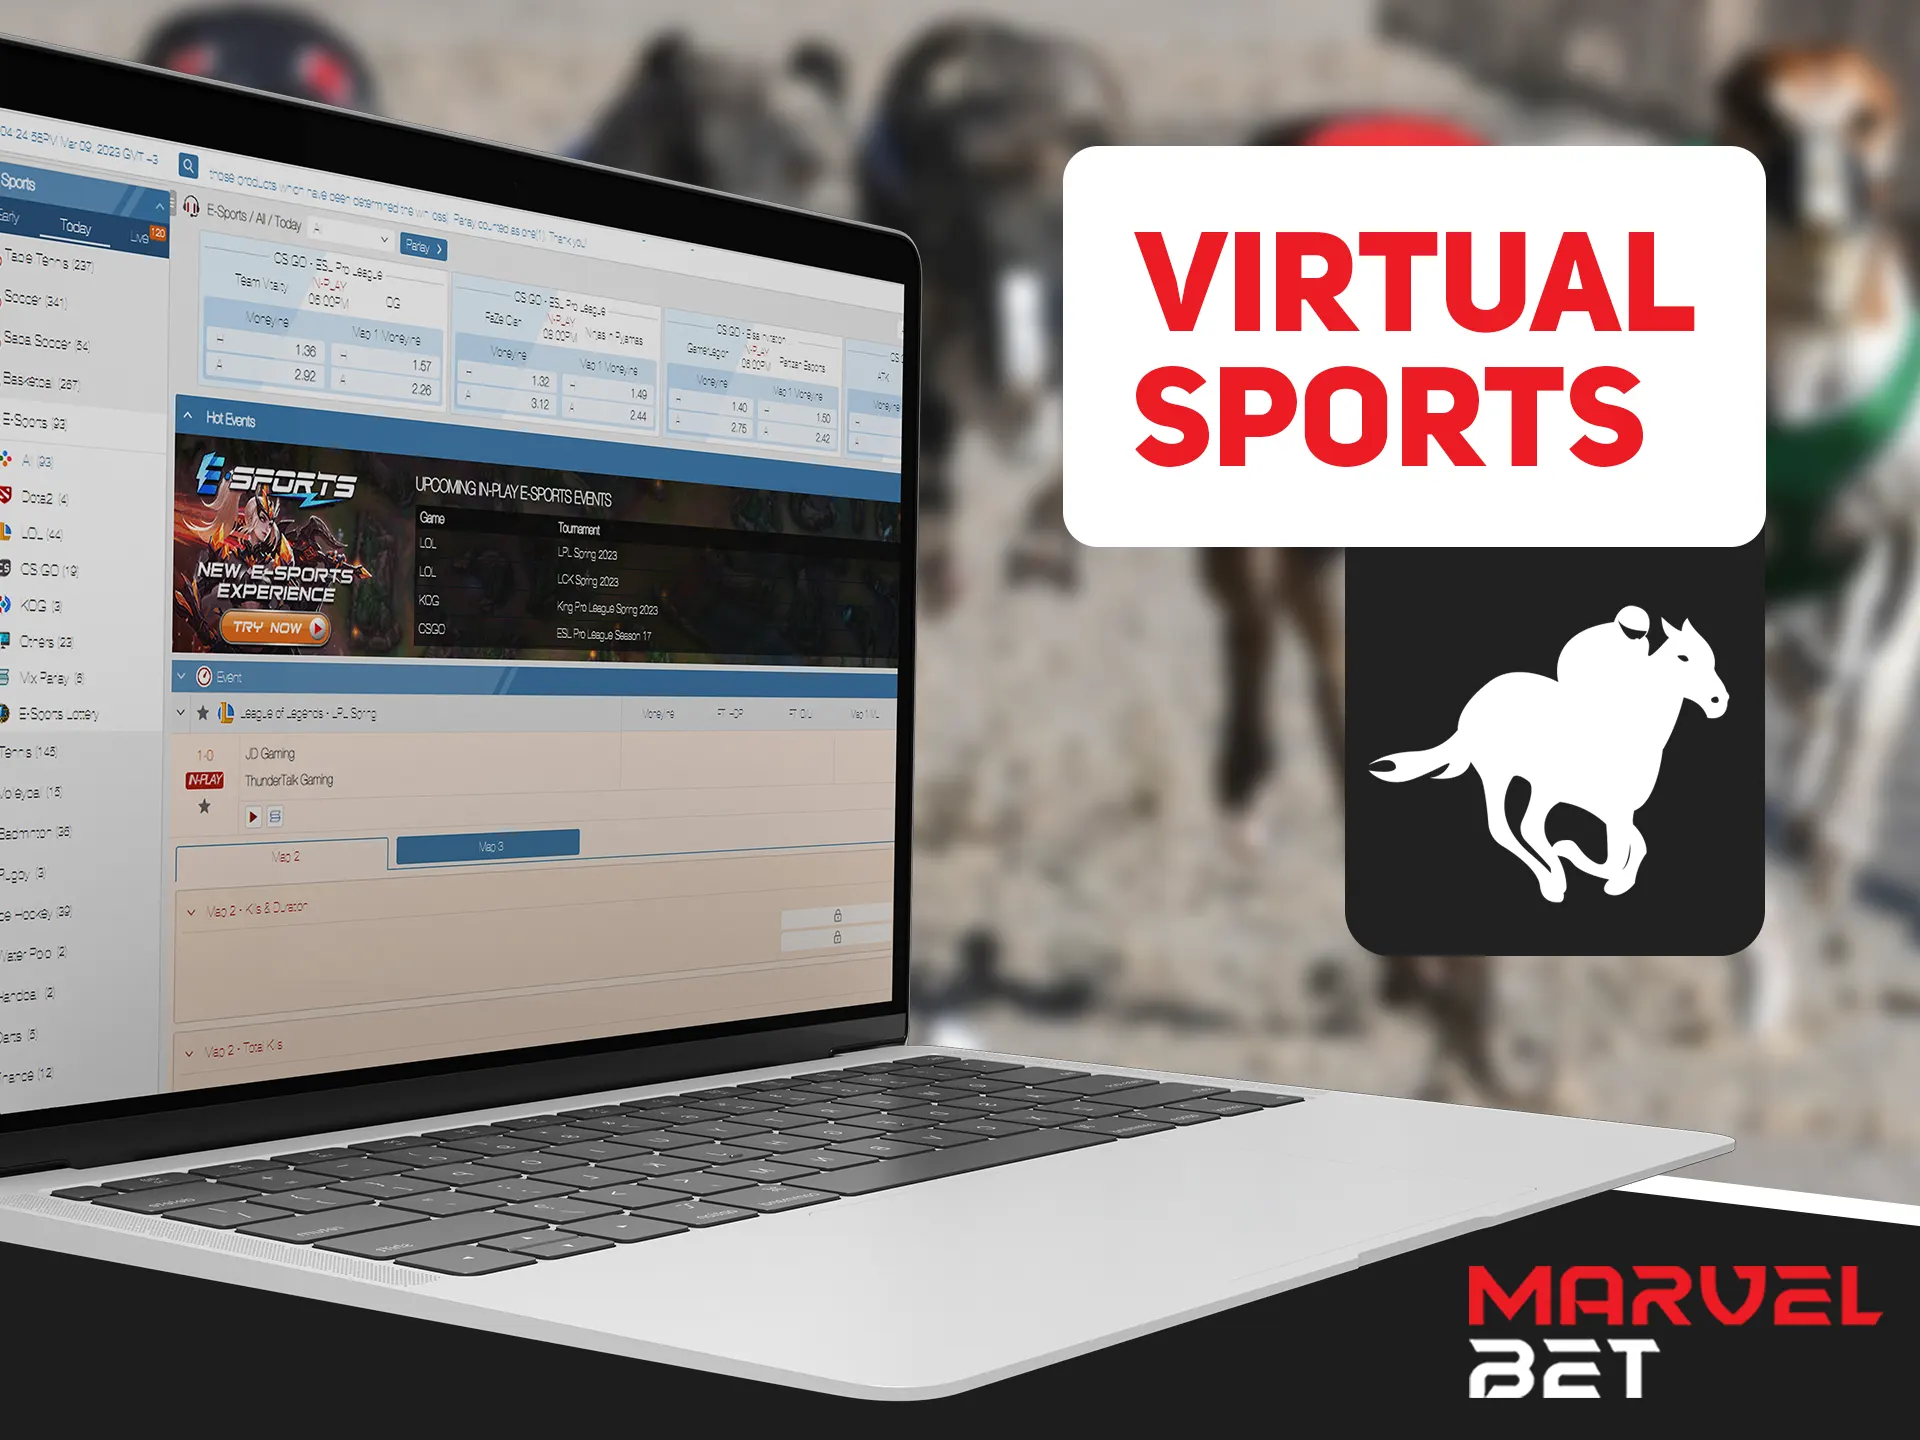 Virtual sports is an intresting way to bet at Marvelbet.